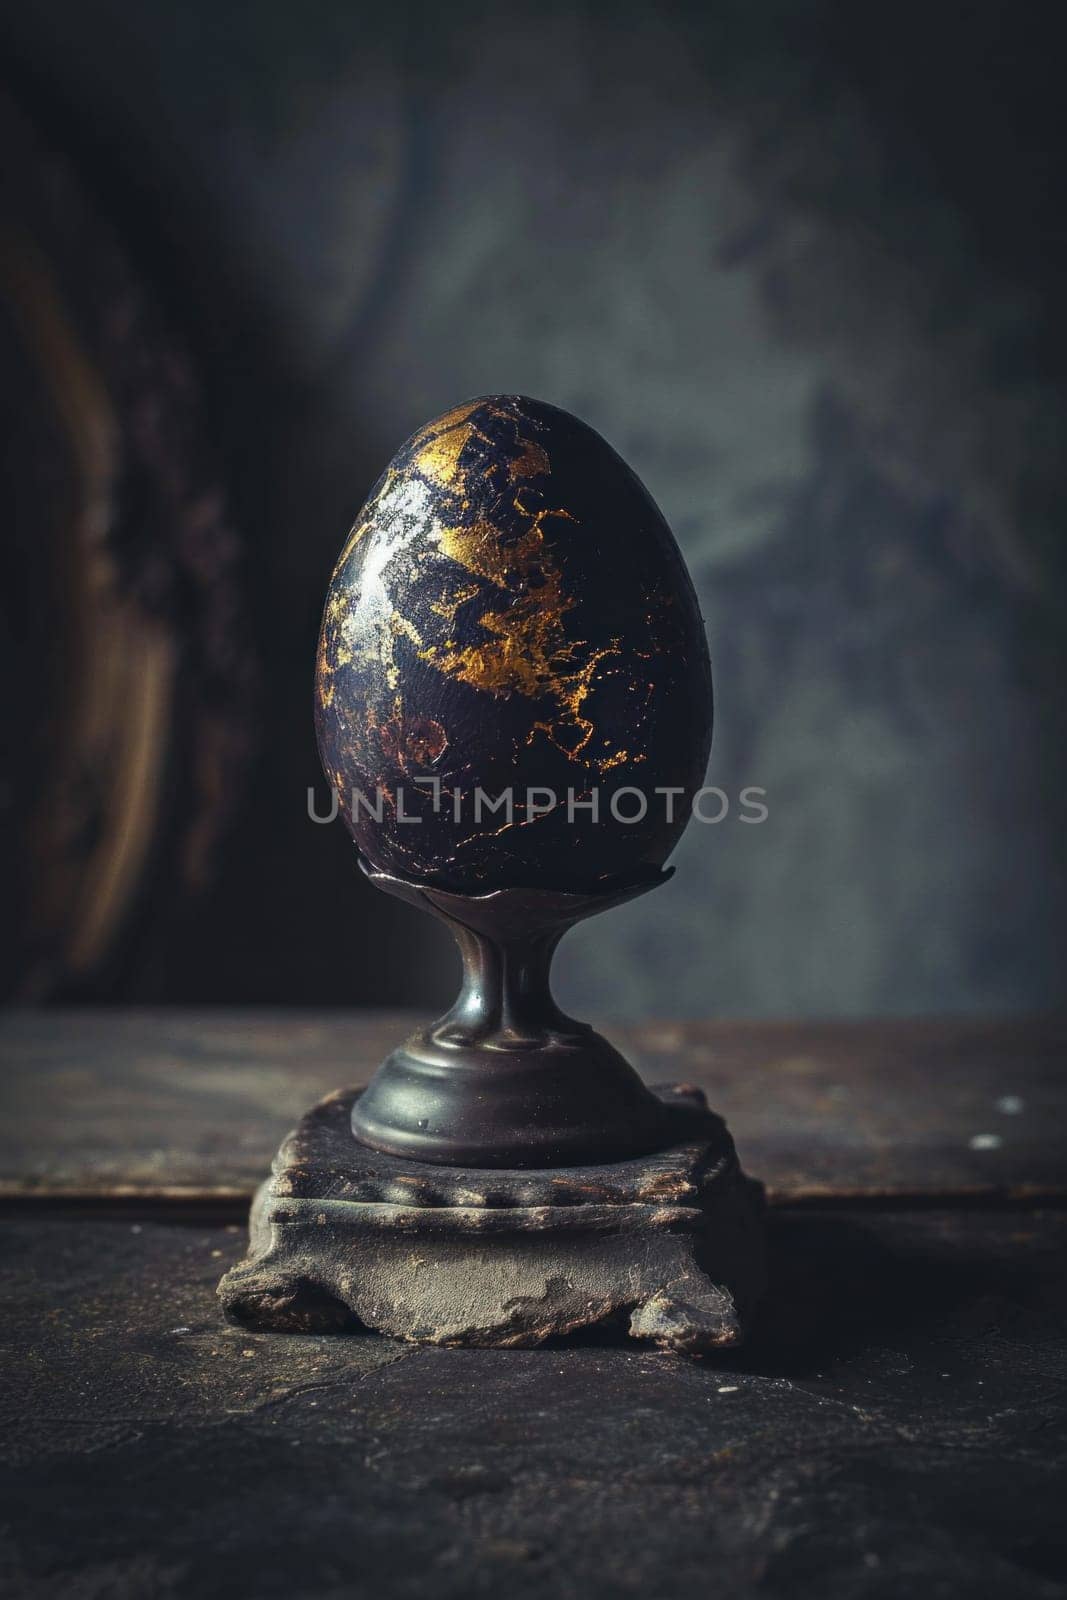 A black and gold egg on a stand with an old wooden table, AI by starush